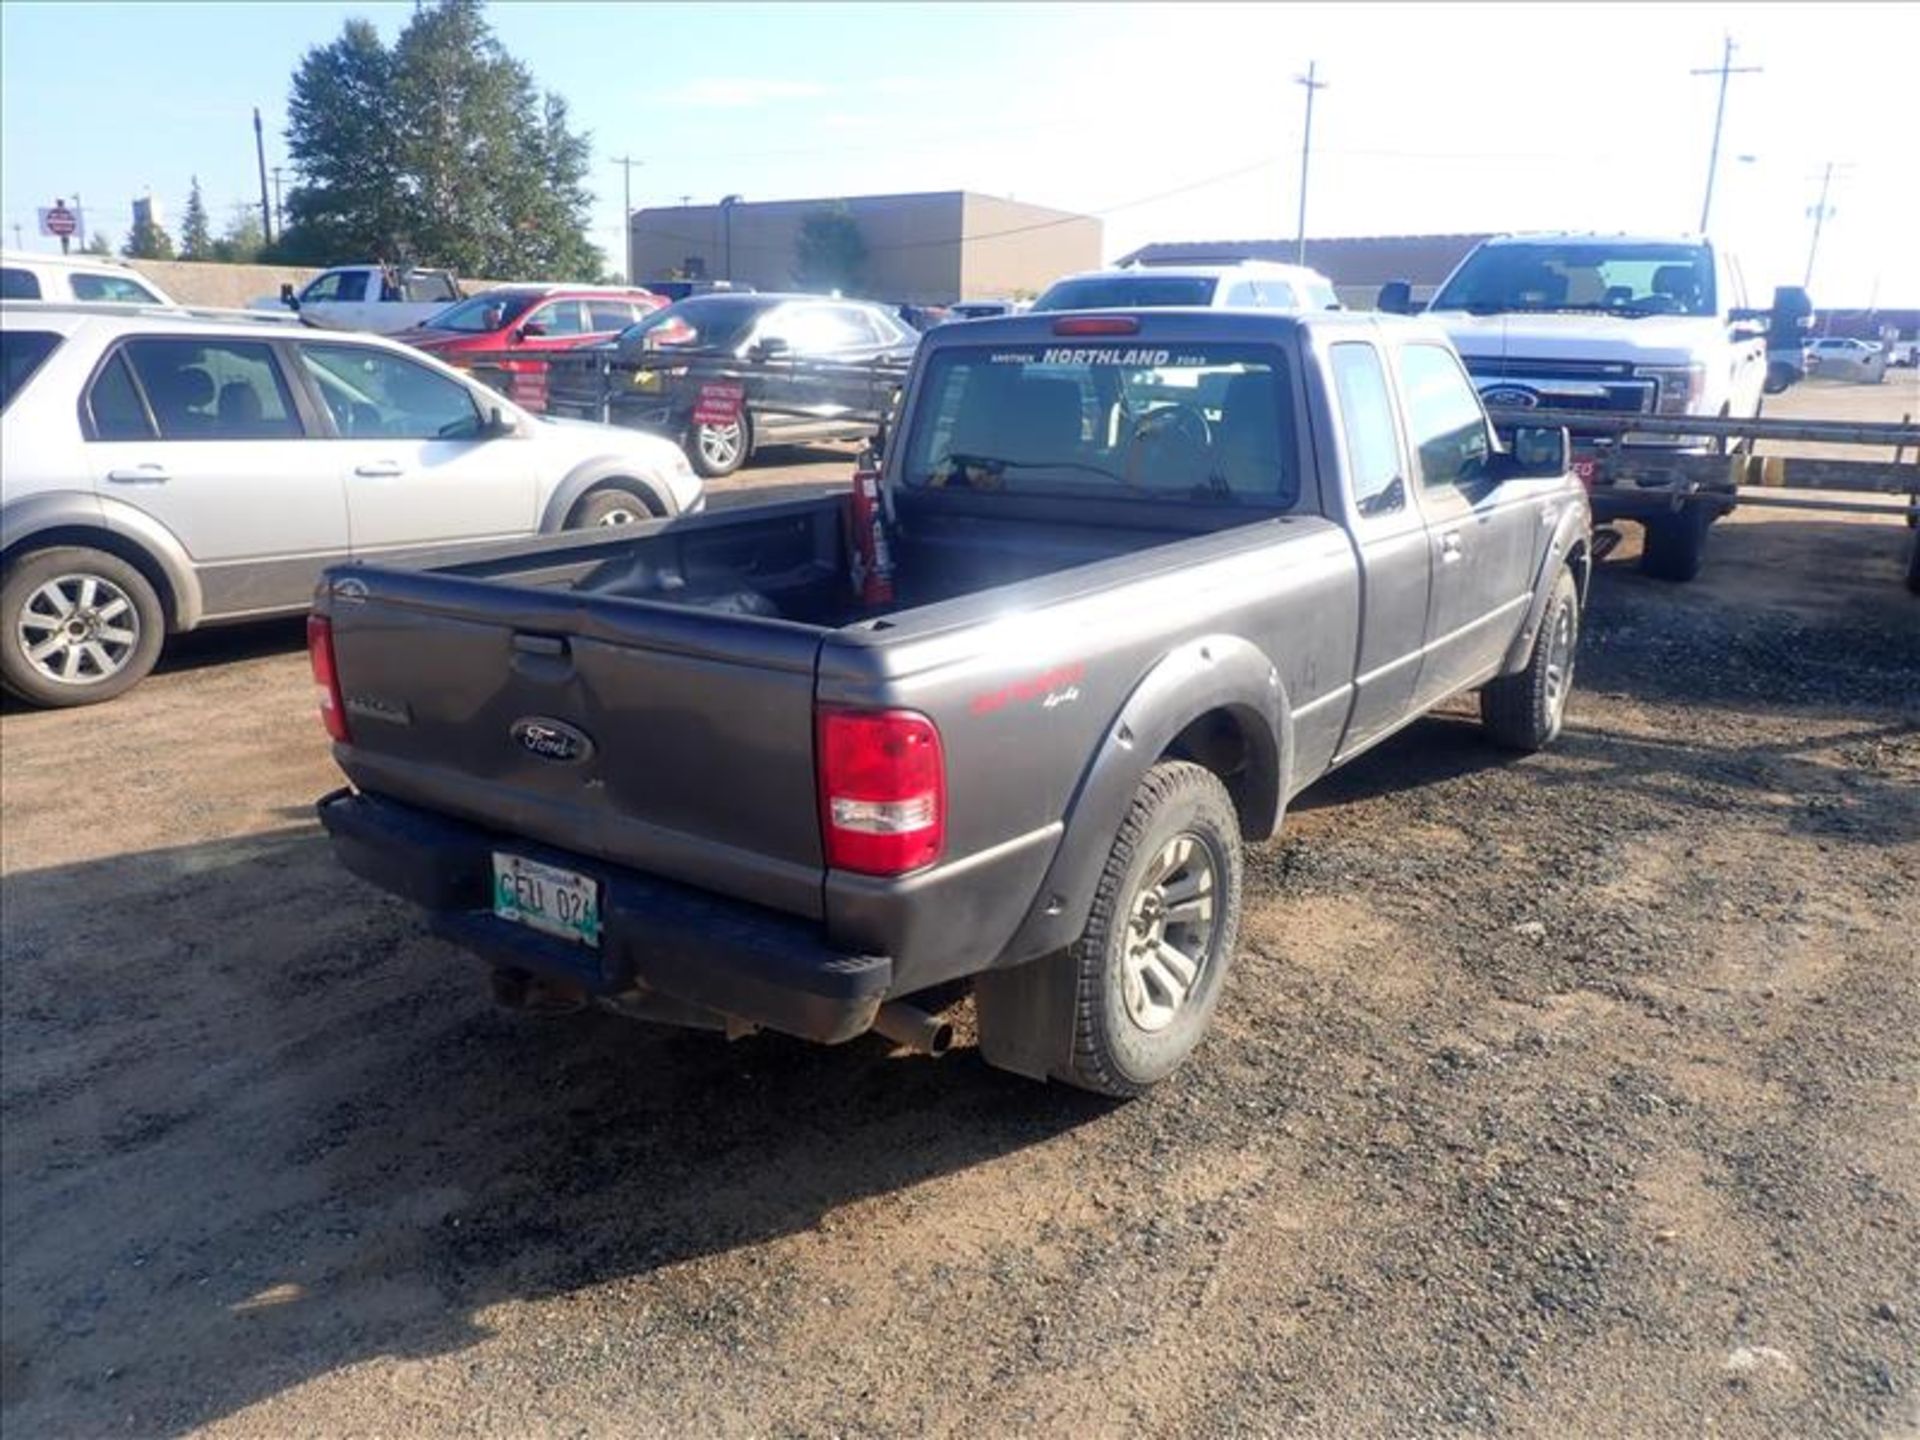 2011 Ford Ranger Sport pick-up truck, VIN 1FTLR4FEXBPA40478, approx. 105000 km, 4x4, 4L eng. (Tag - Image 3 of 8